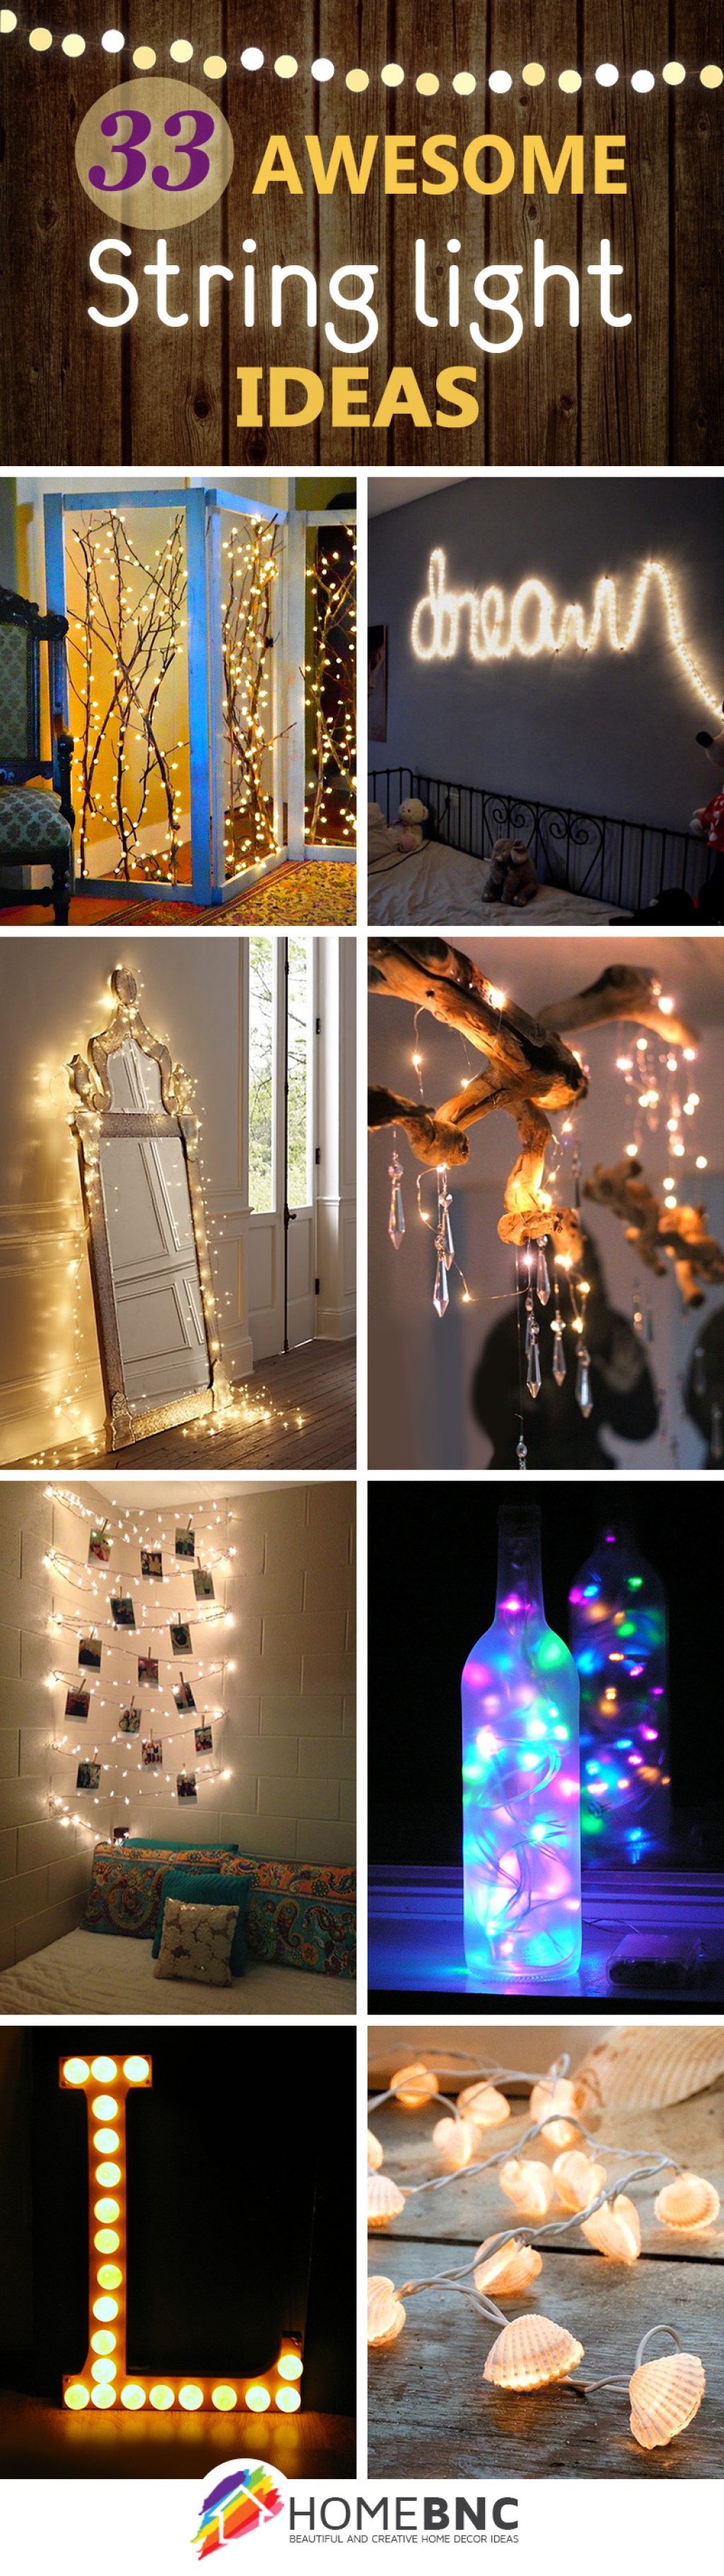 creative decorative lights - Best String Lights Decorating Ideas and Designs for